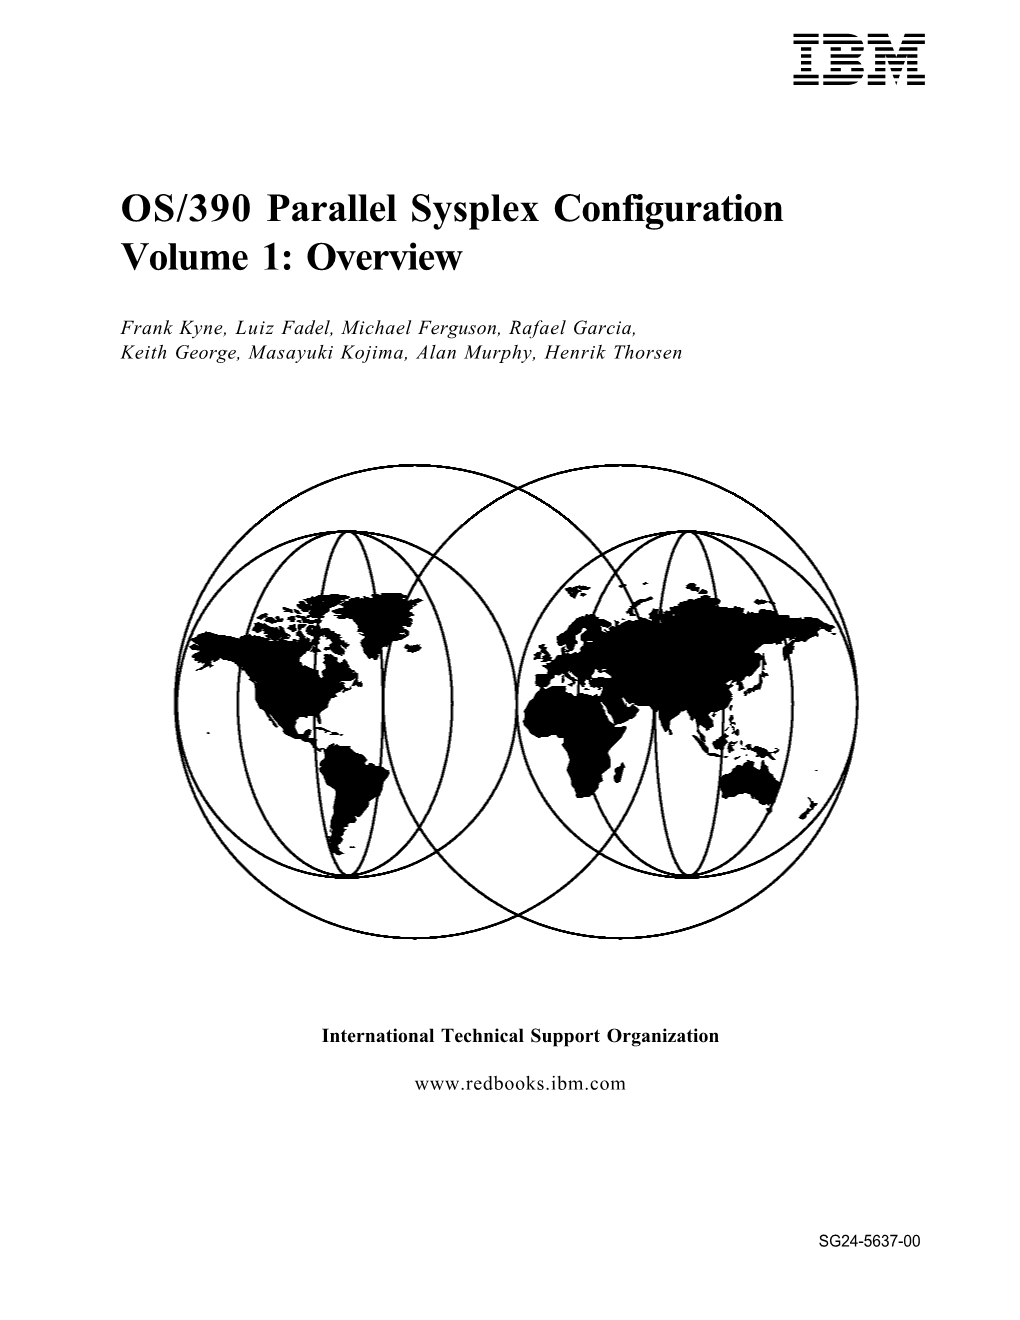 OS/390 Parallel Sysplex Configuration Volume 1: Overview